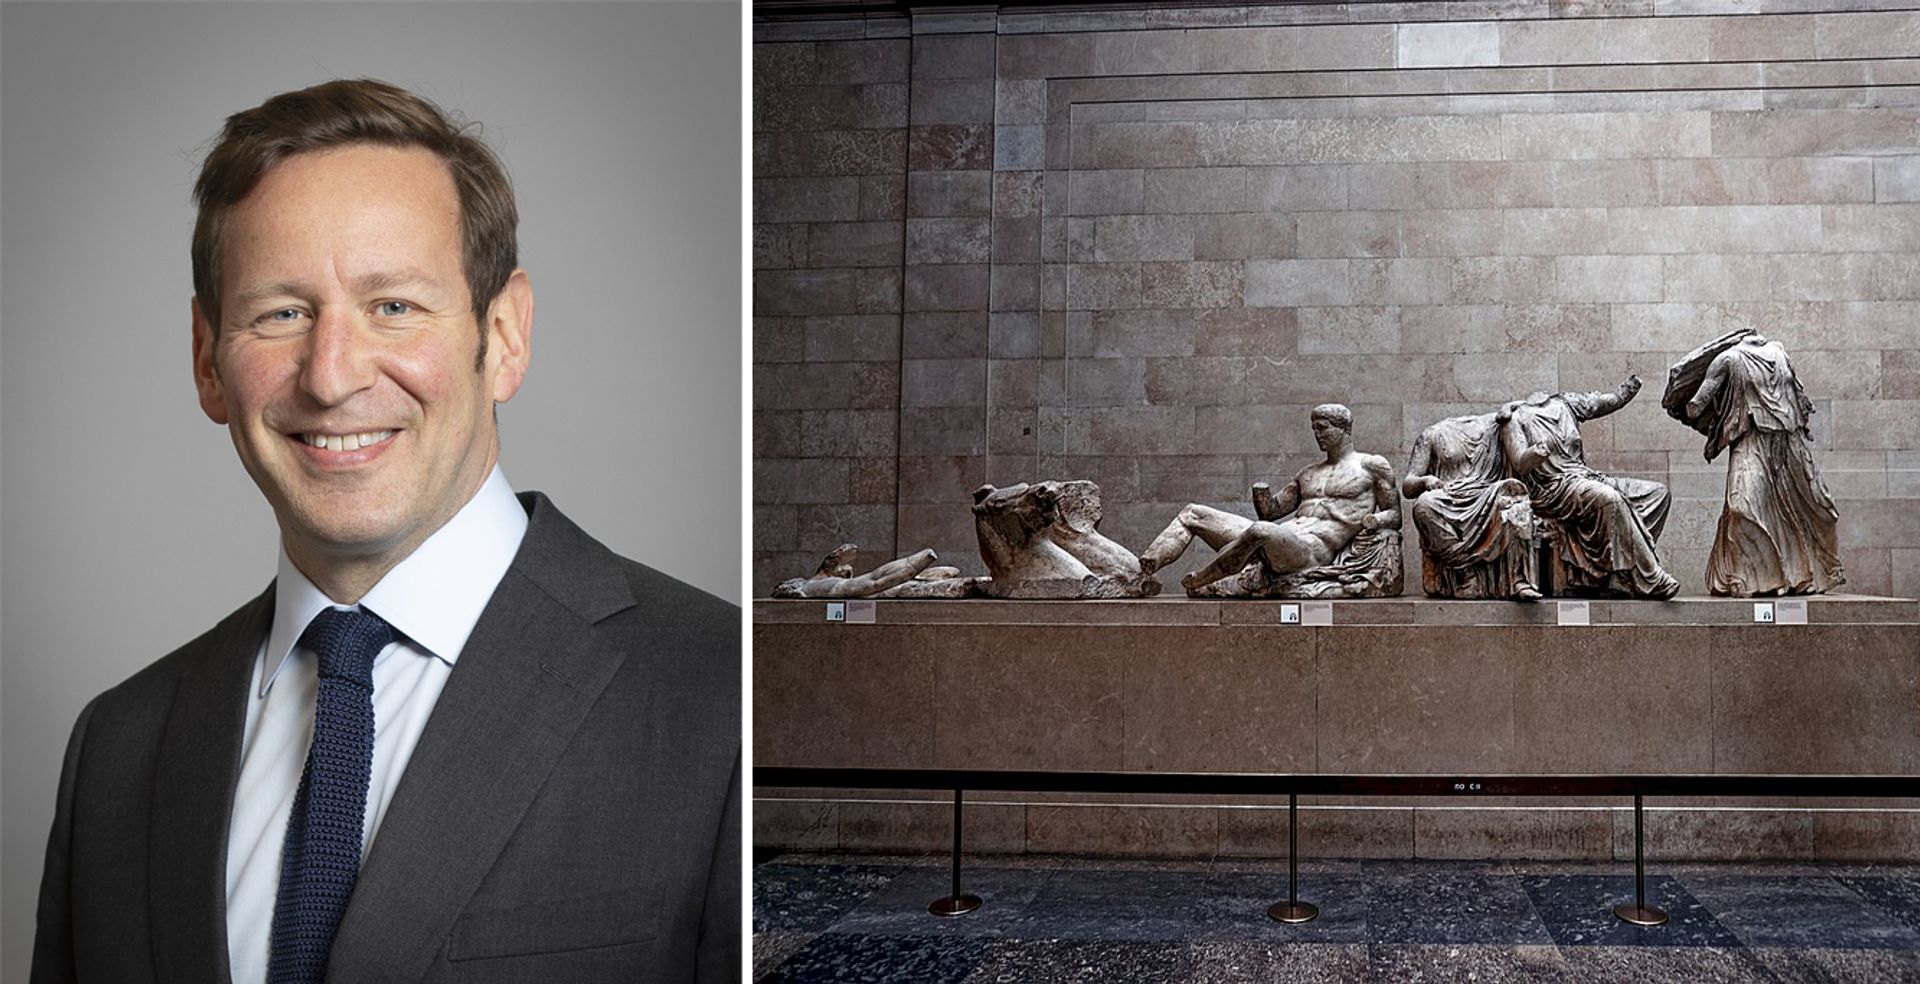 The “debate has really moved on. I think I would support the return of the [Parthenon] marbles now," said Ed Vaizey Vaizey: photo: Roger Harris; Marbles: Txllxt TxllxT